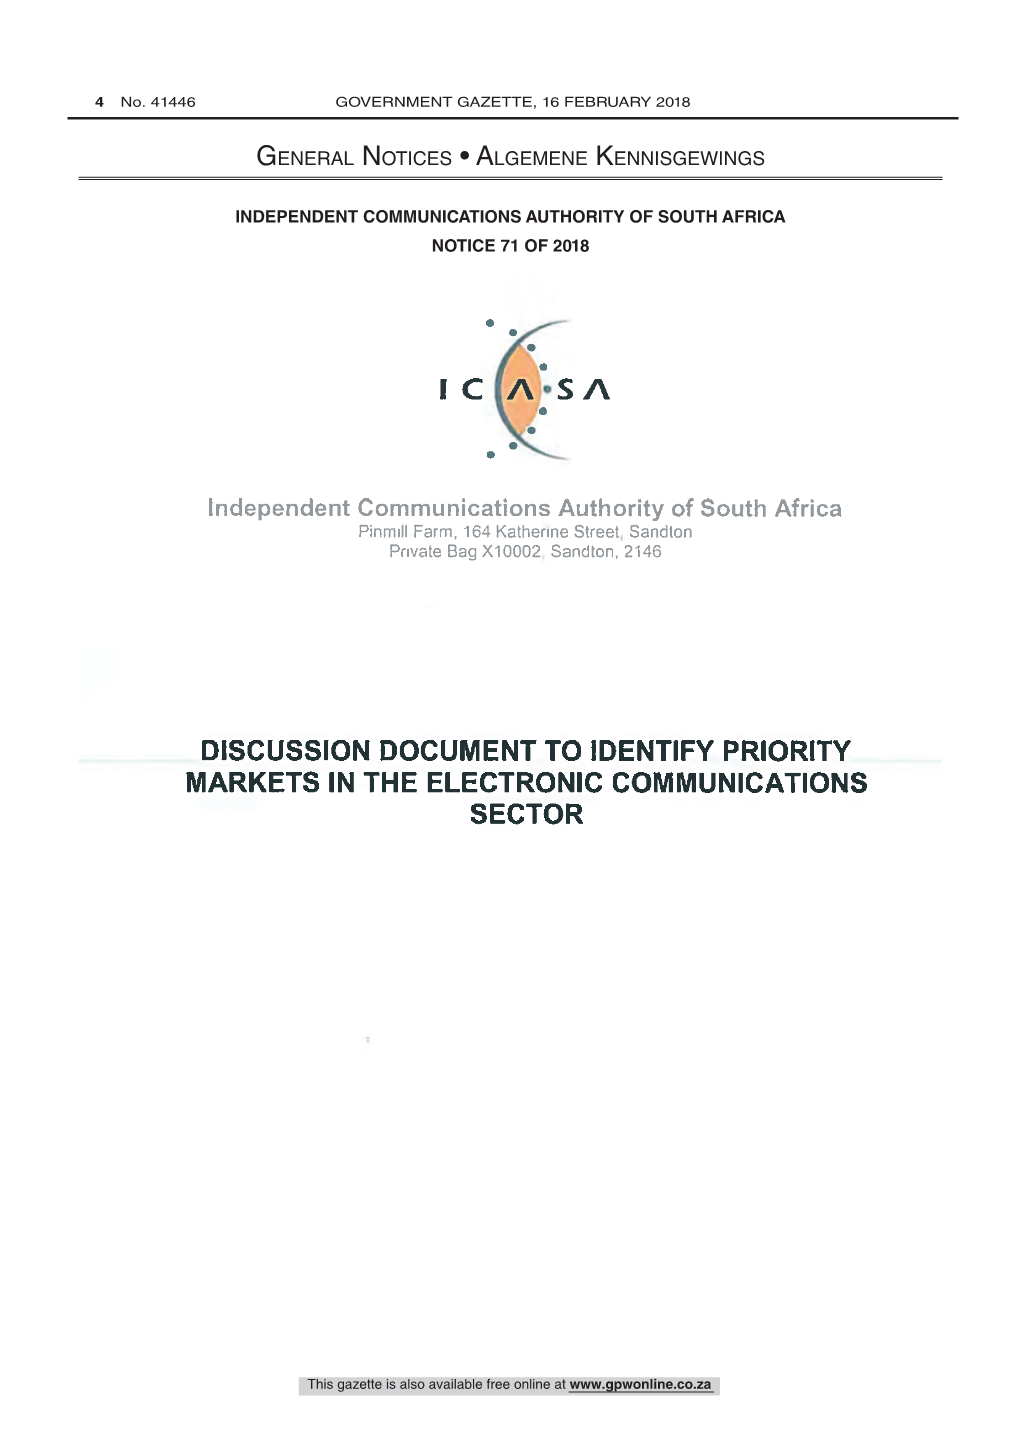 Independent Communications Authority of South Africa Act: Discussion Document to Identify Priority Markets in Electronic Communi